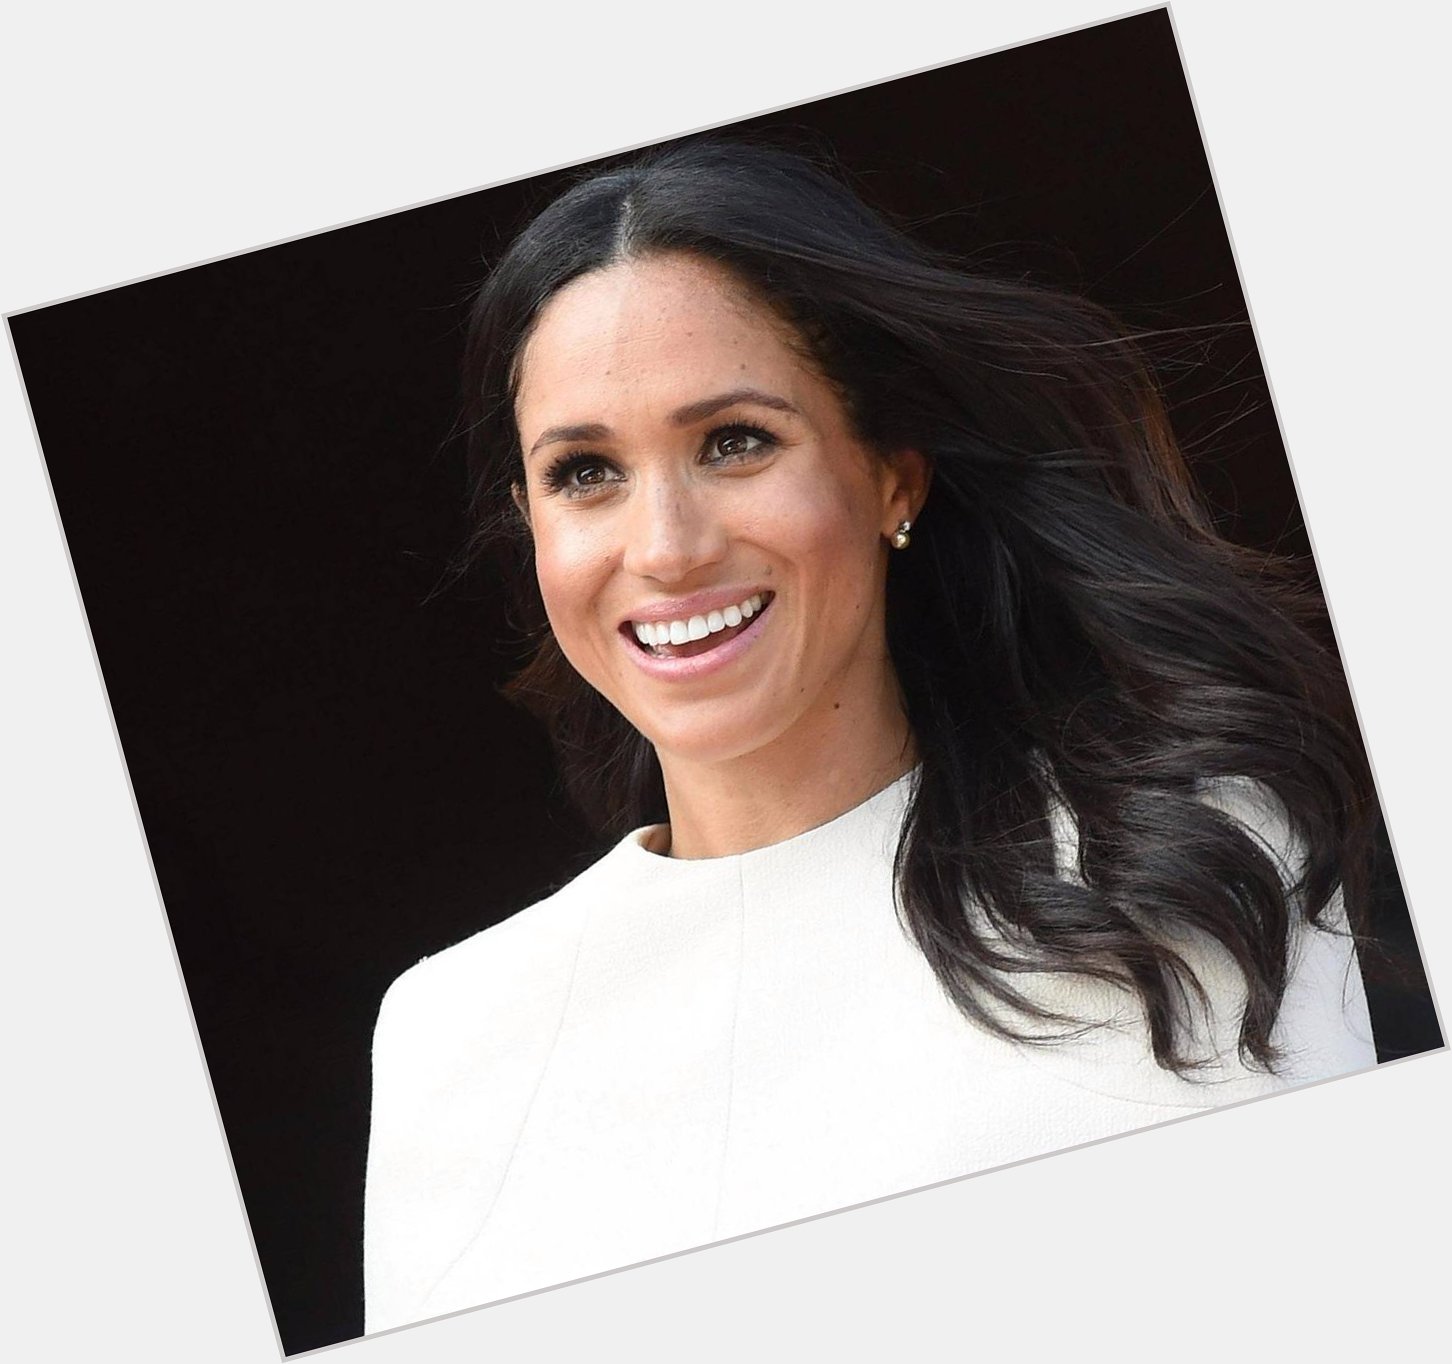 Happy Birthday to Meghan Markle, the Duchess of Sussex! 